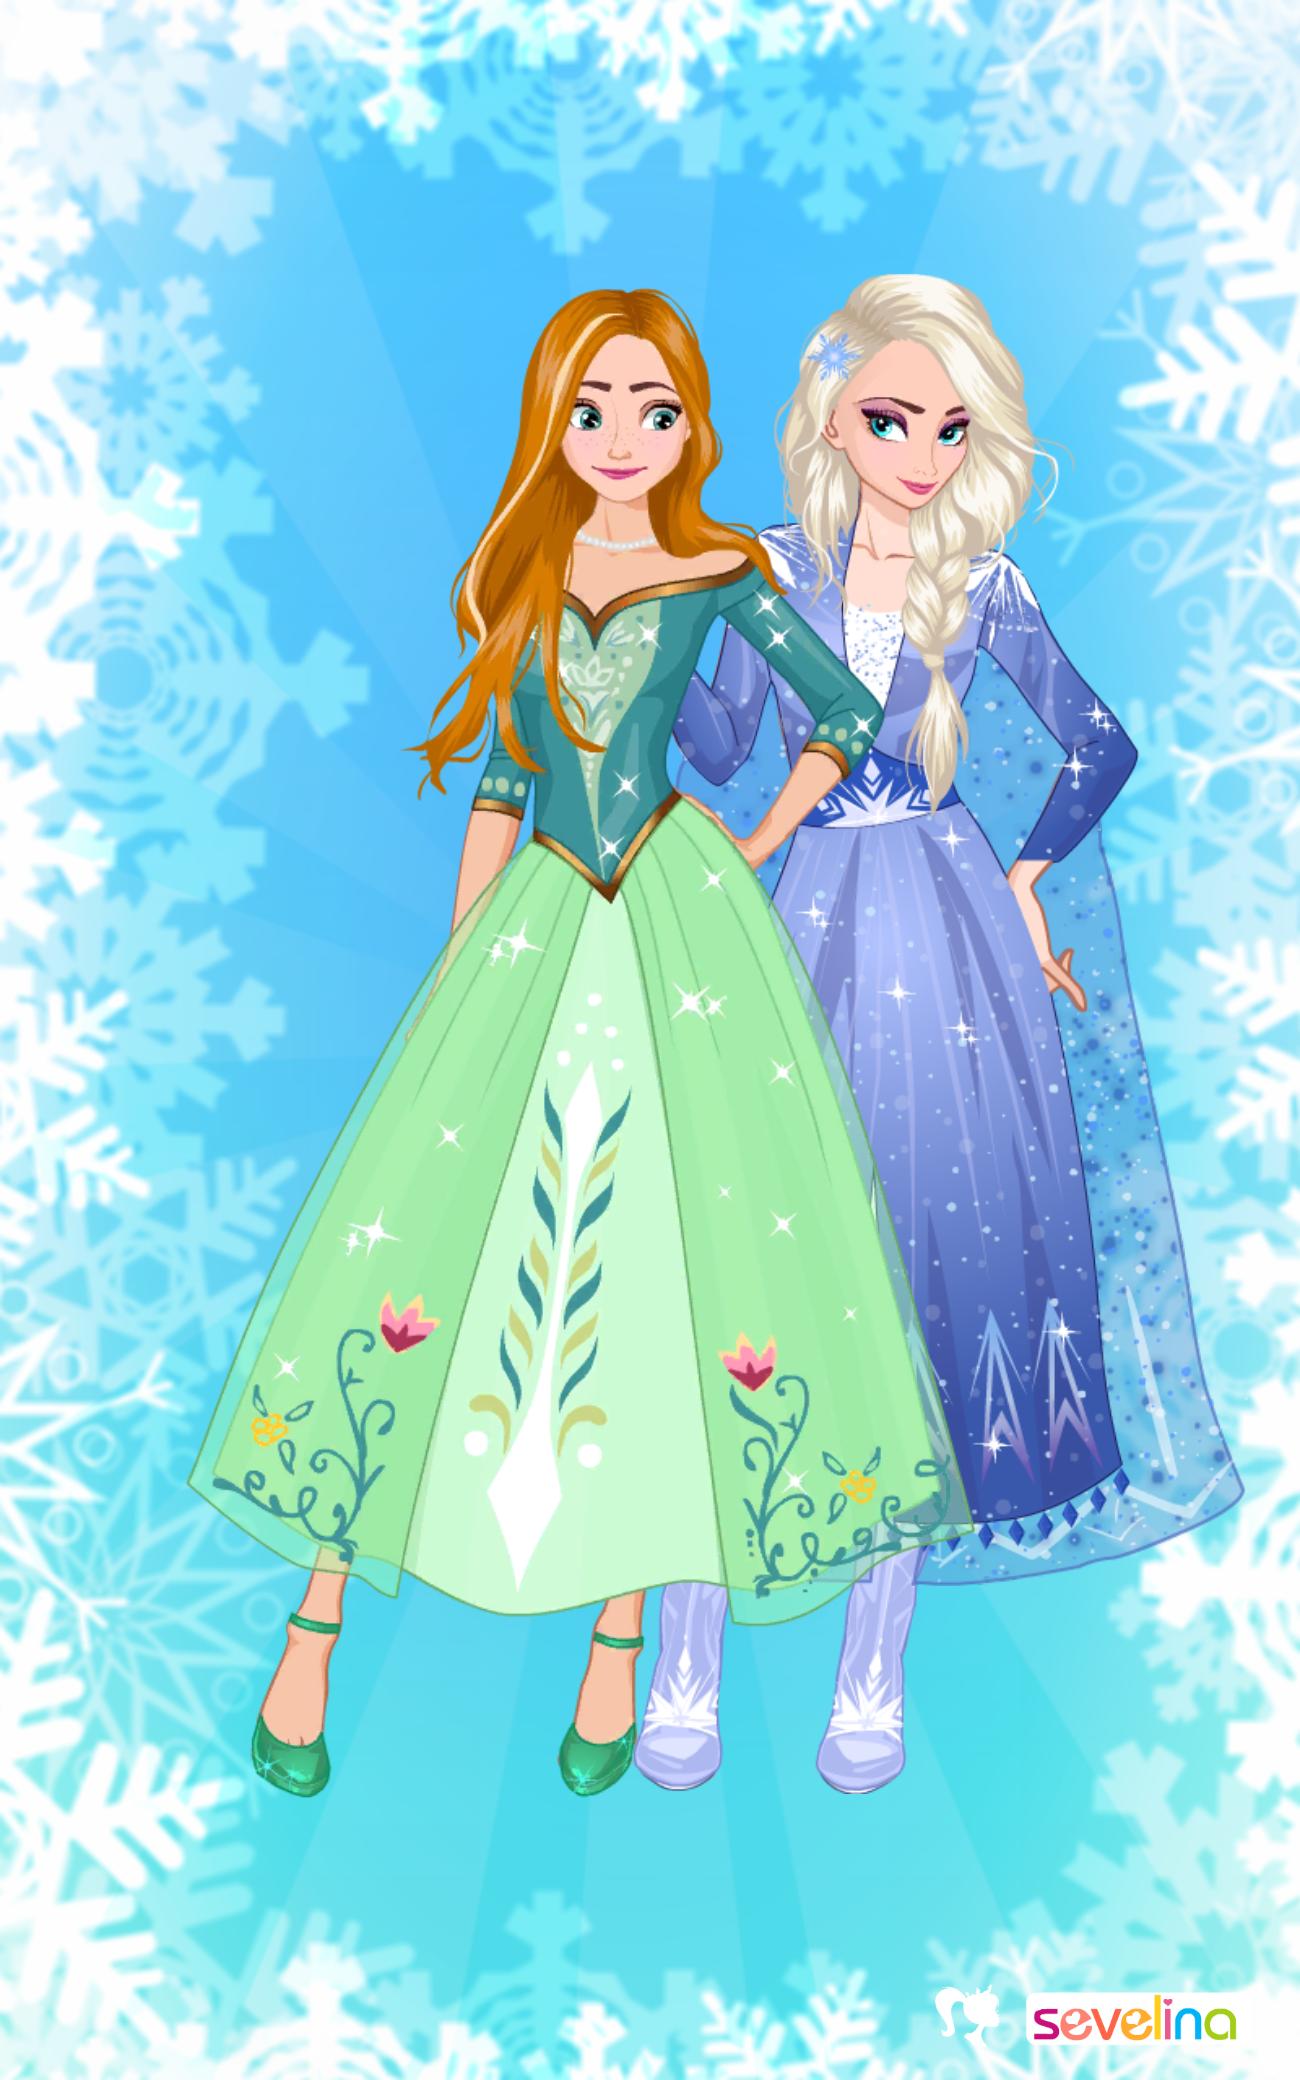 ❄️ Icy or Fire 🔥 dress up game ❄️ Frozen land 2.4 Screenshot 5